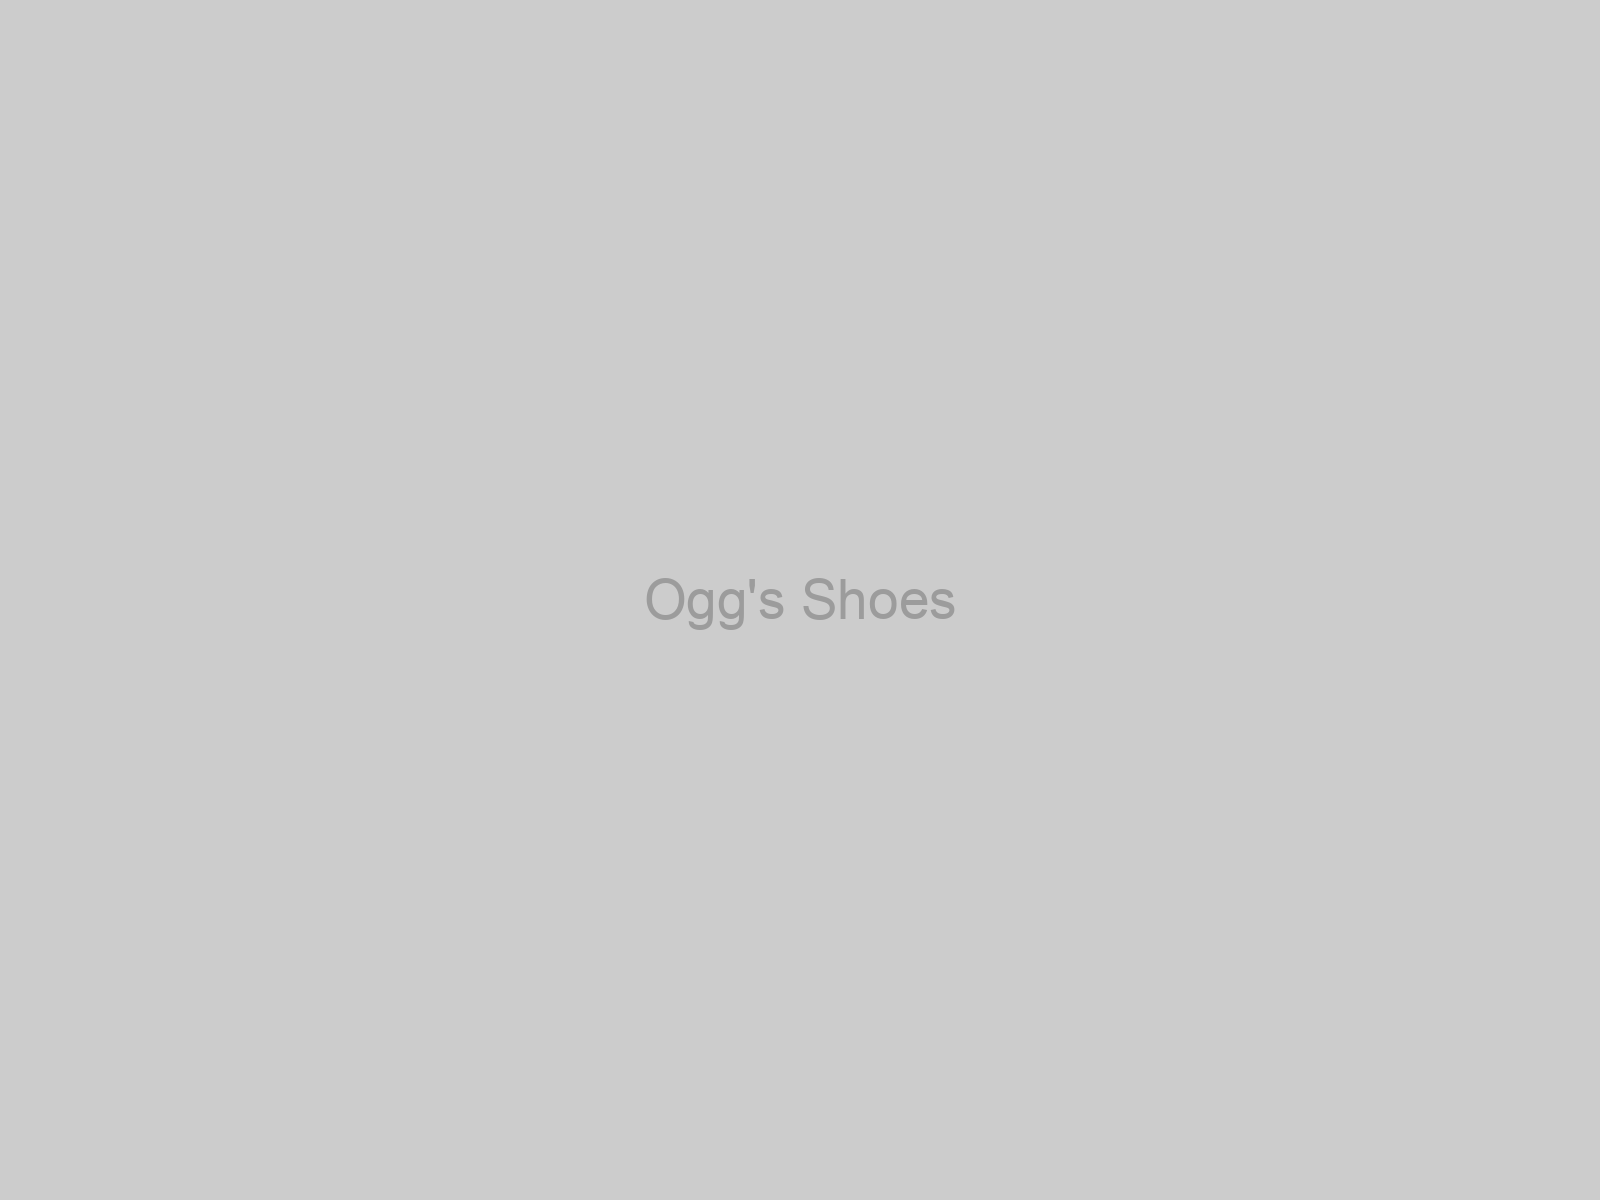 Ogg's Shoes